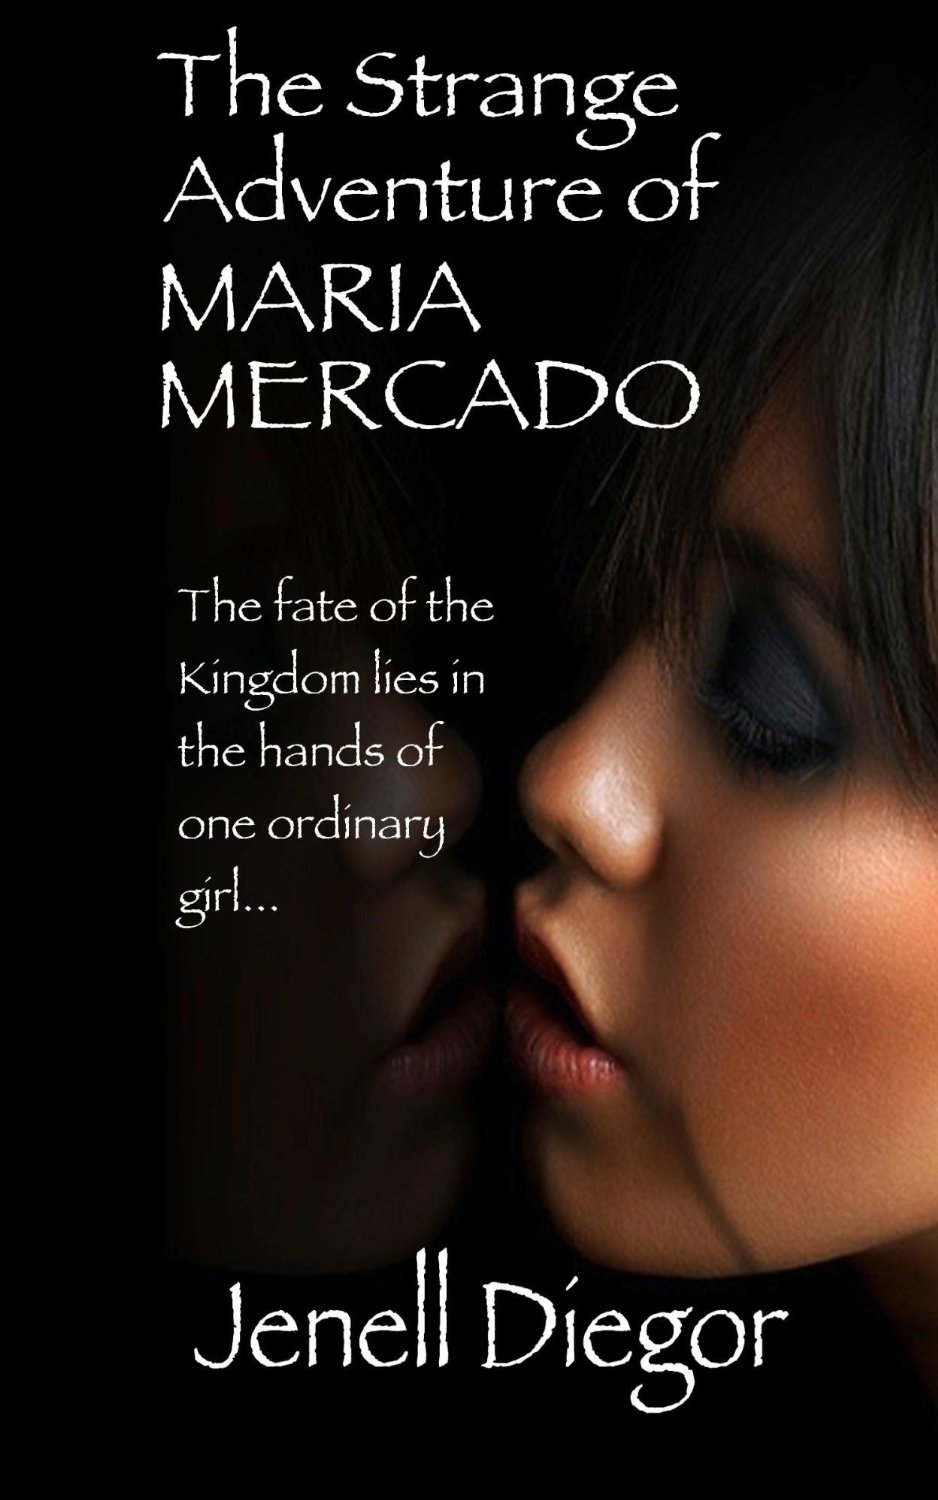 The Strange Adventure of Maria Mercado by Jenell Diegor